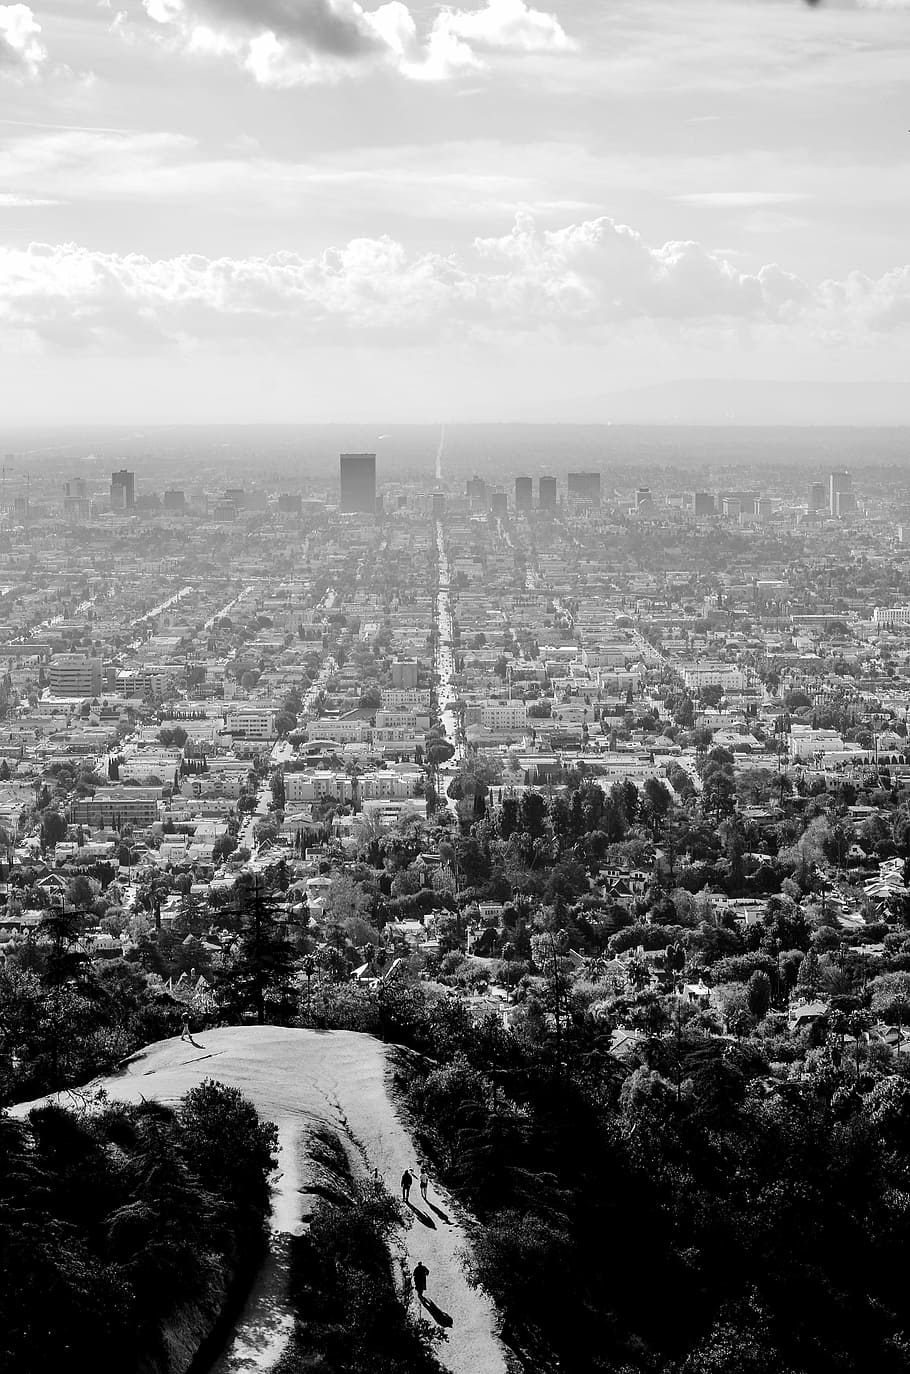 aerial view of trees near buildings, grayscale, photo, city, landscape